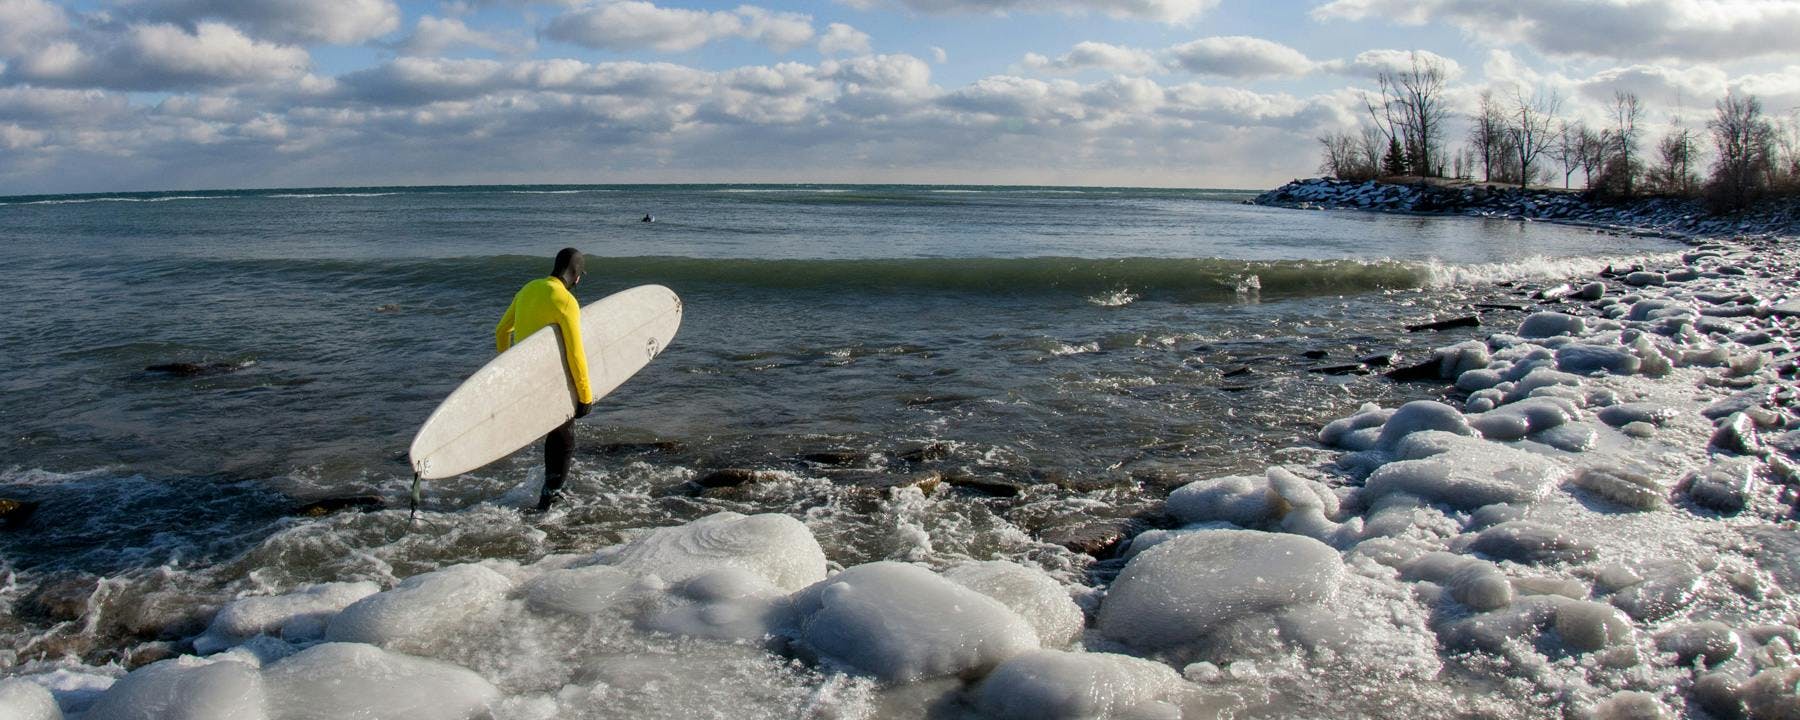 Surf the Greats: catching winter waves